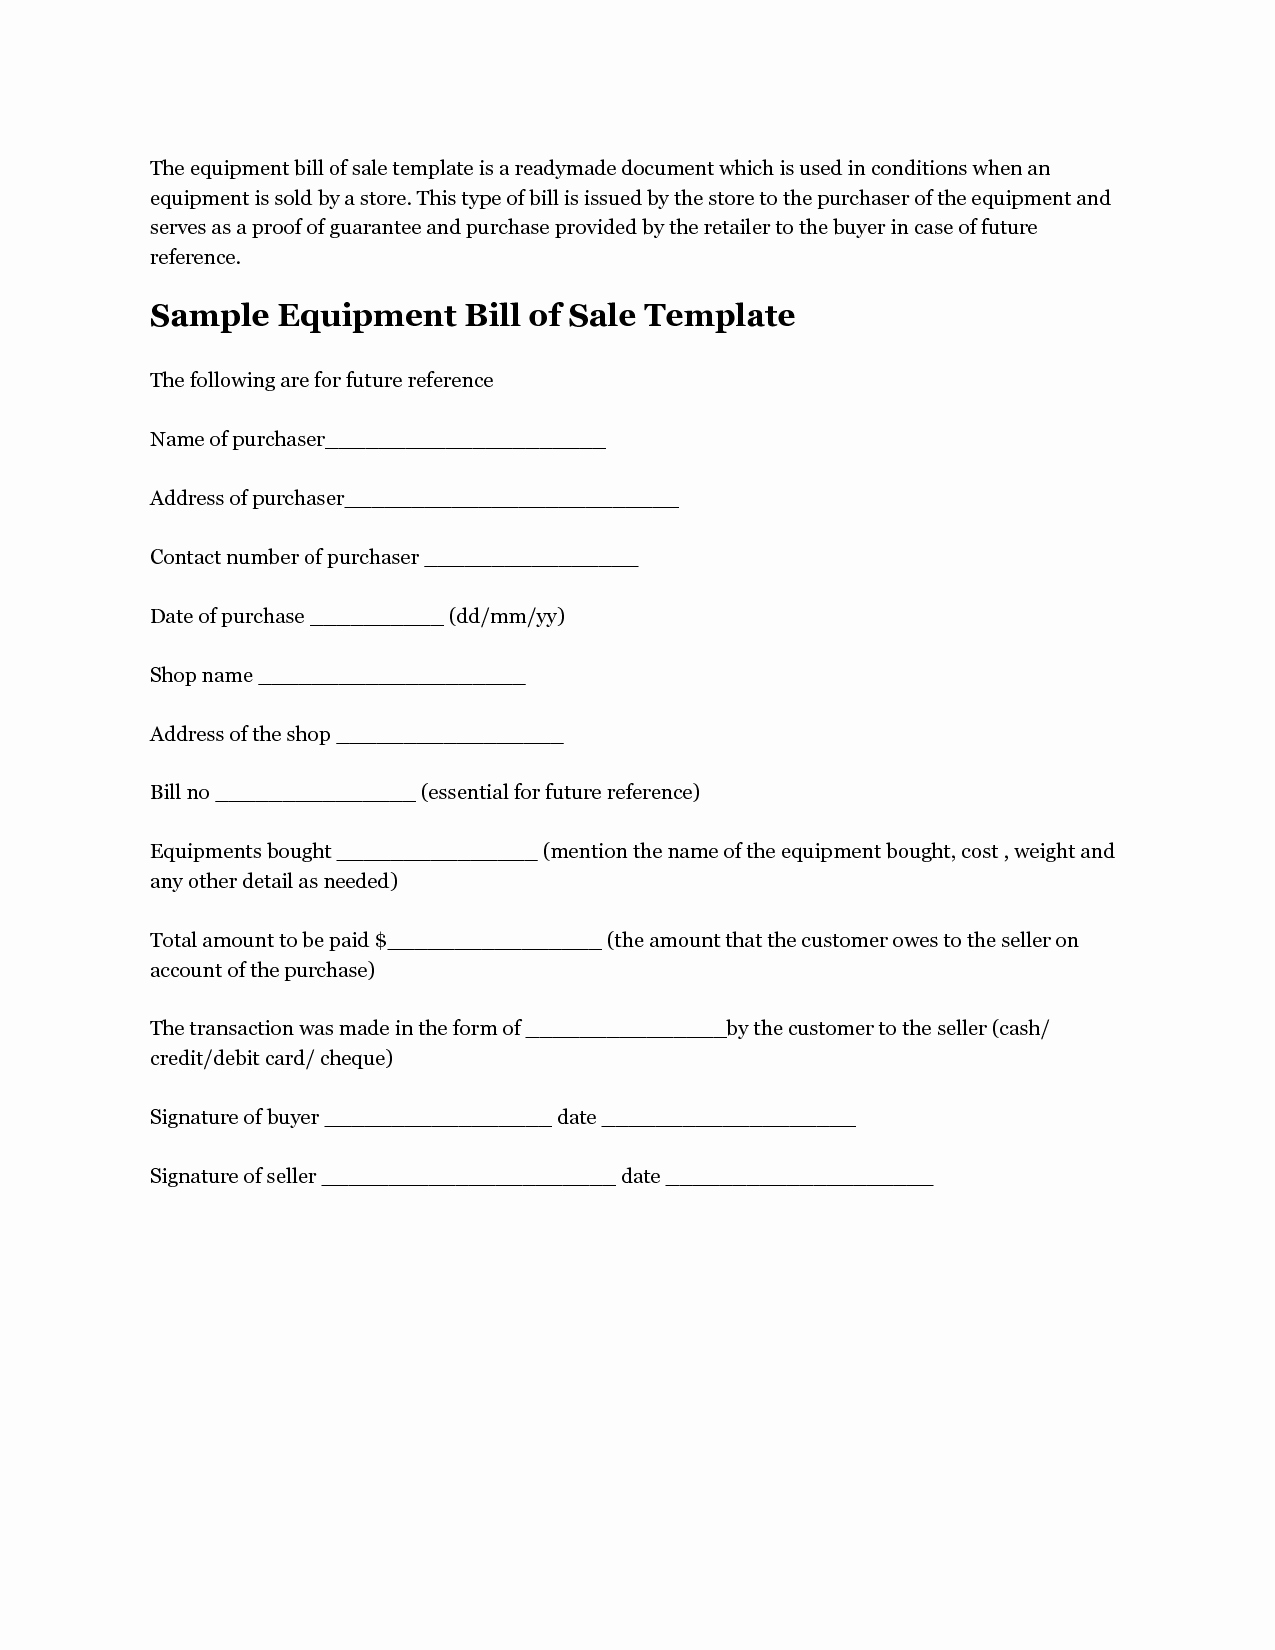 Equipment Bill Of Sale Pdf Awesome Printable Sample Equipment Bill Sale Template form